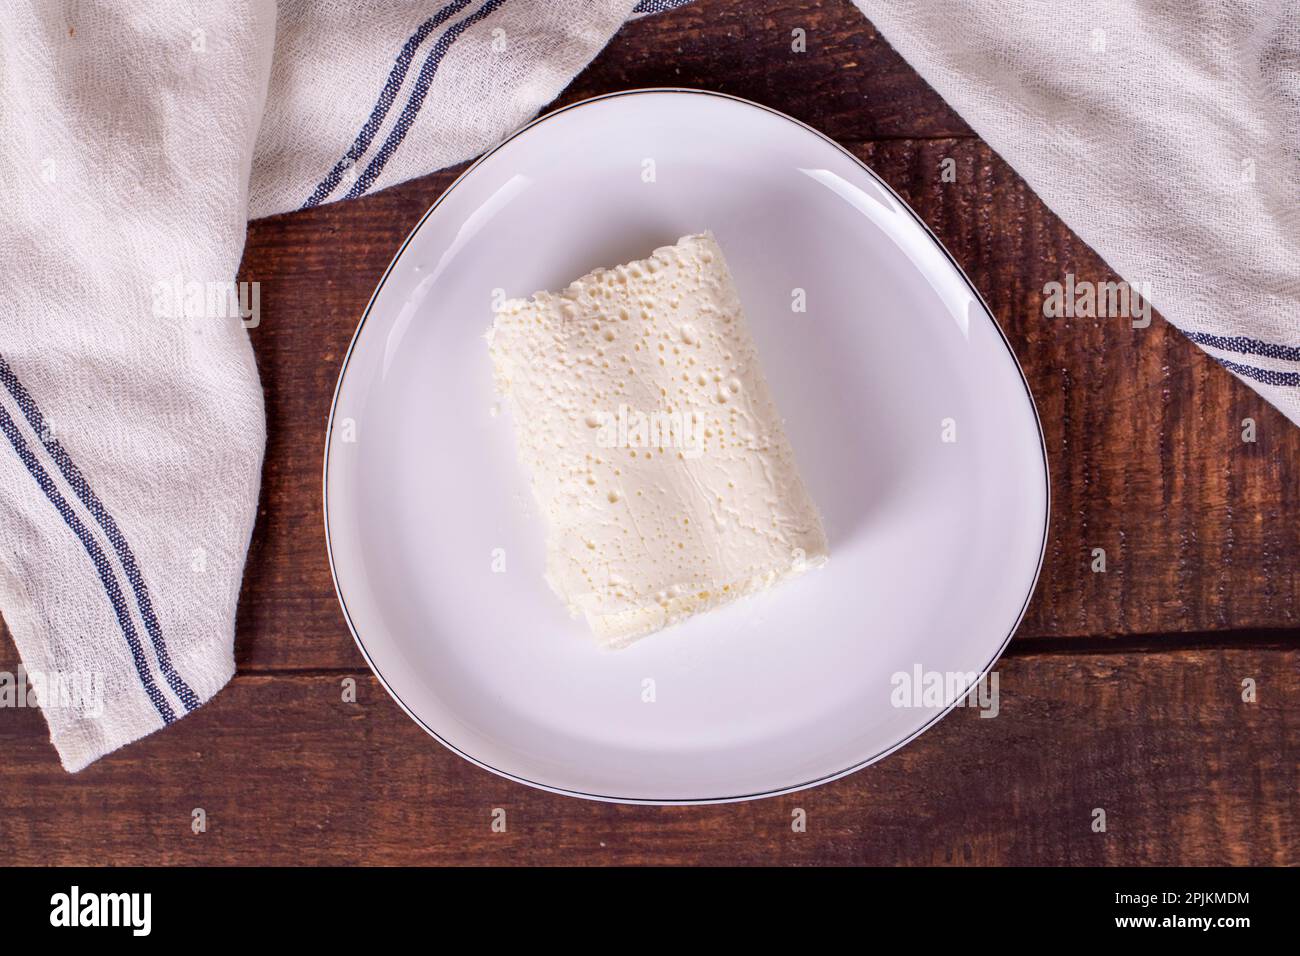 Clotted cream on wood background. Clotted cream (butter cream) for Turkish breakfast. local name inek kaymak. Top view Stock Photo